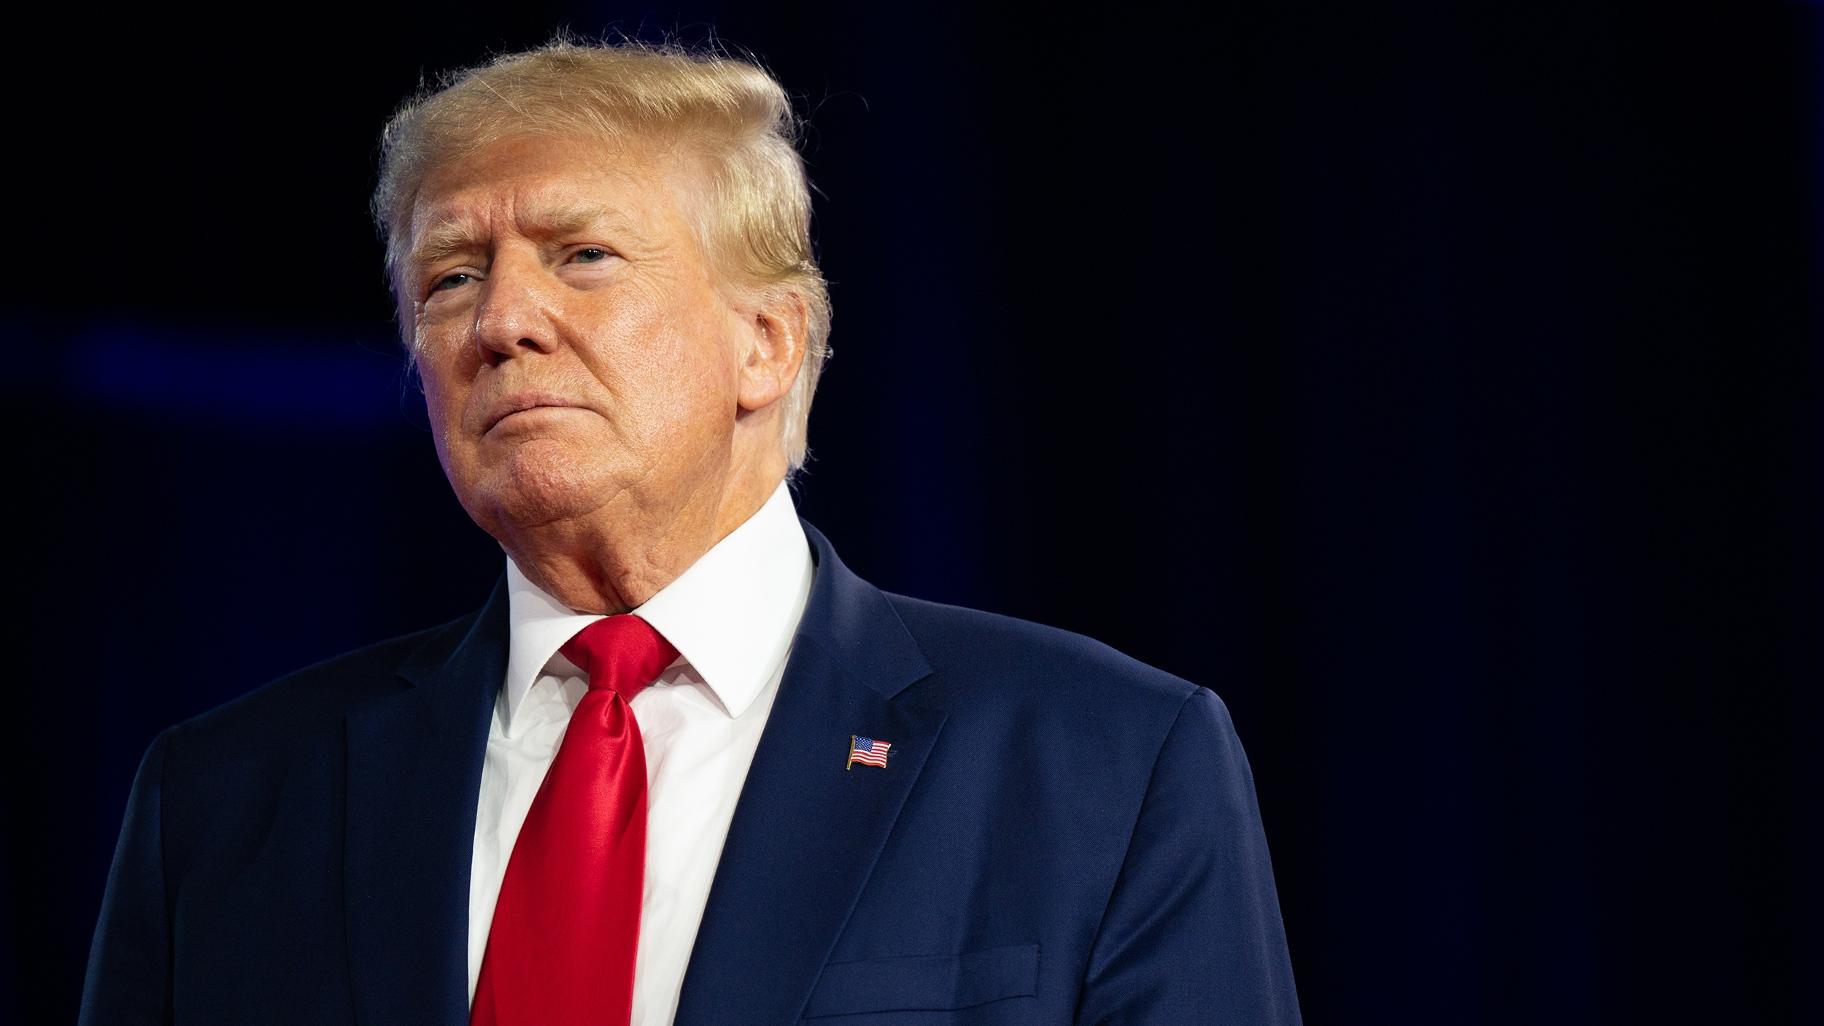 The legal drama surrounding Former President Donald Trump, here on Aug. 6, 2022, is reaching a fever pitch. (Brandon Bell / Getty Images via CNN.)